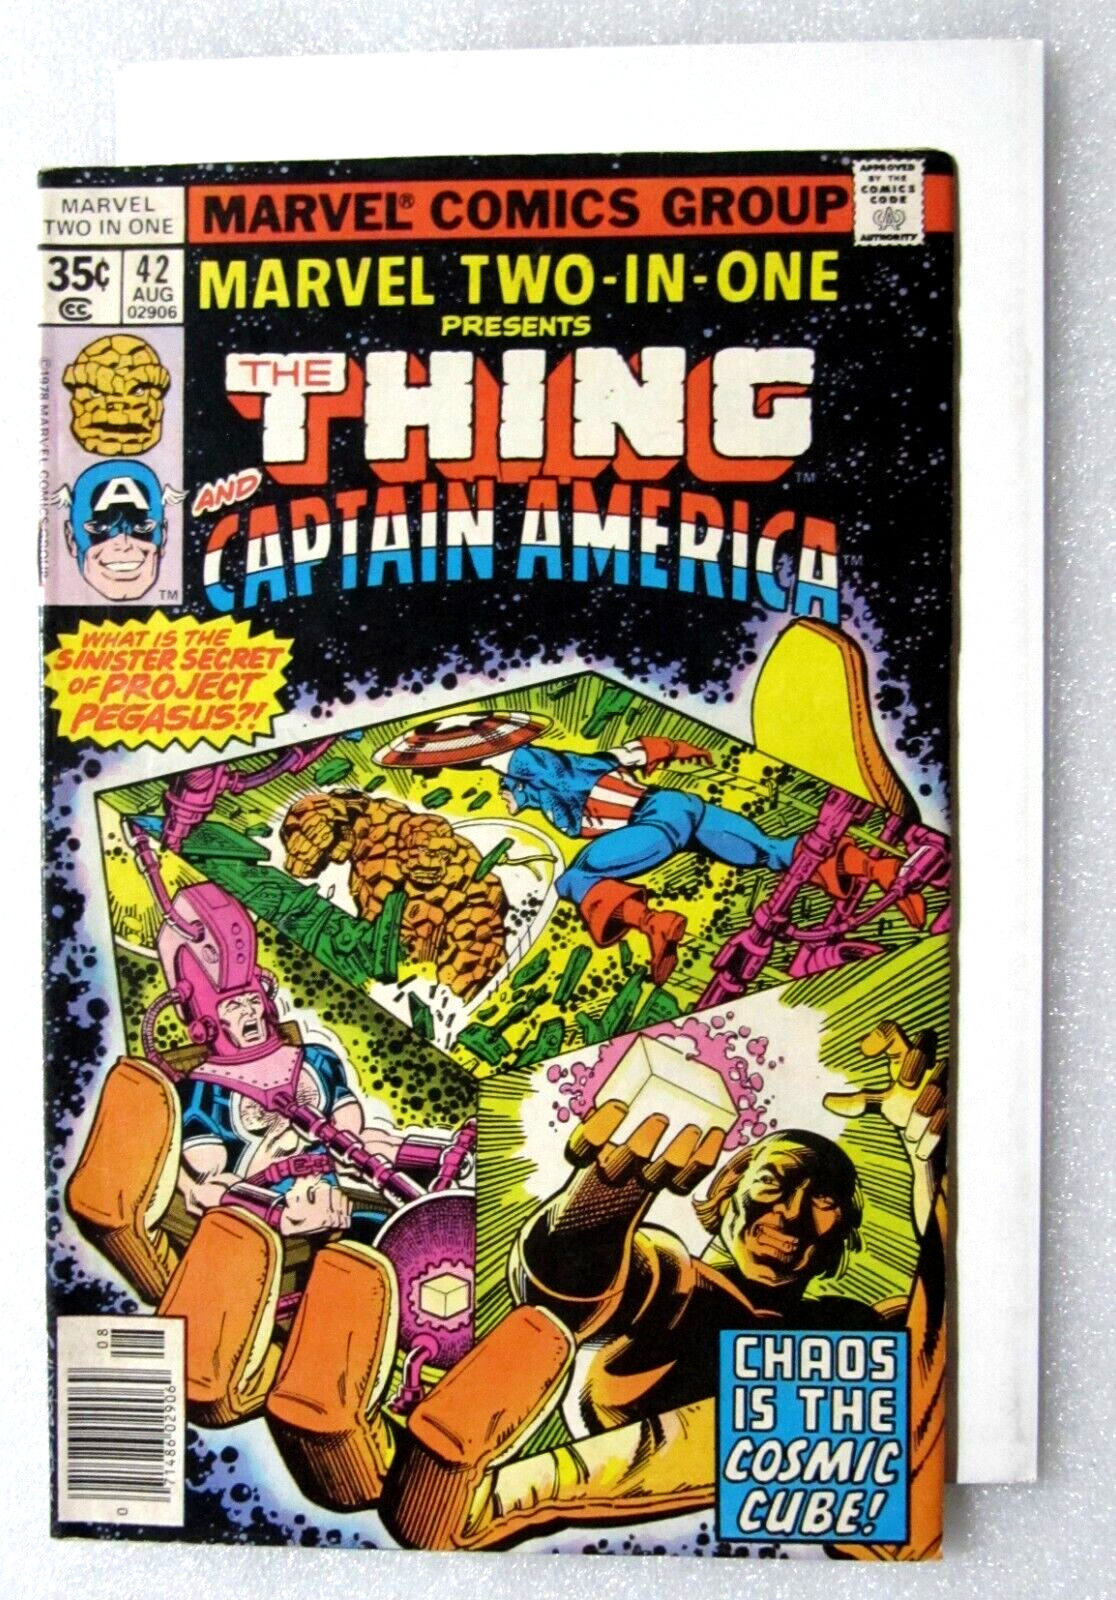 MARVEL TWO IN ONE #42 THING CAPTAIN AMERICA WUNDARR 1978 BRONZE AGE MARVEL COMIC